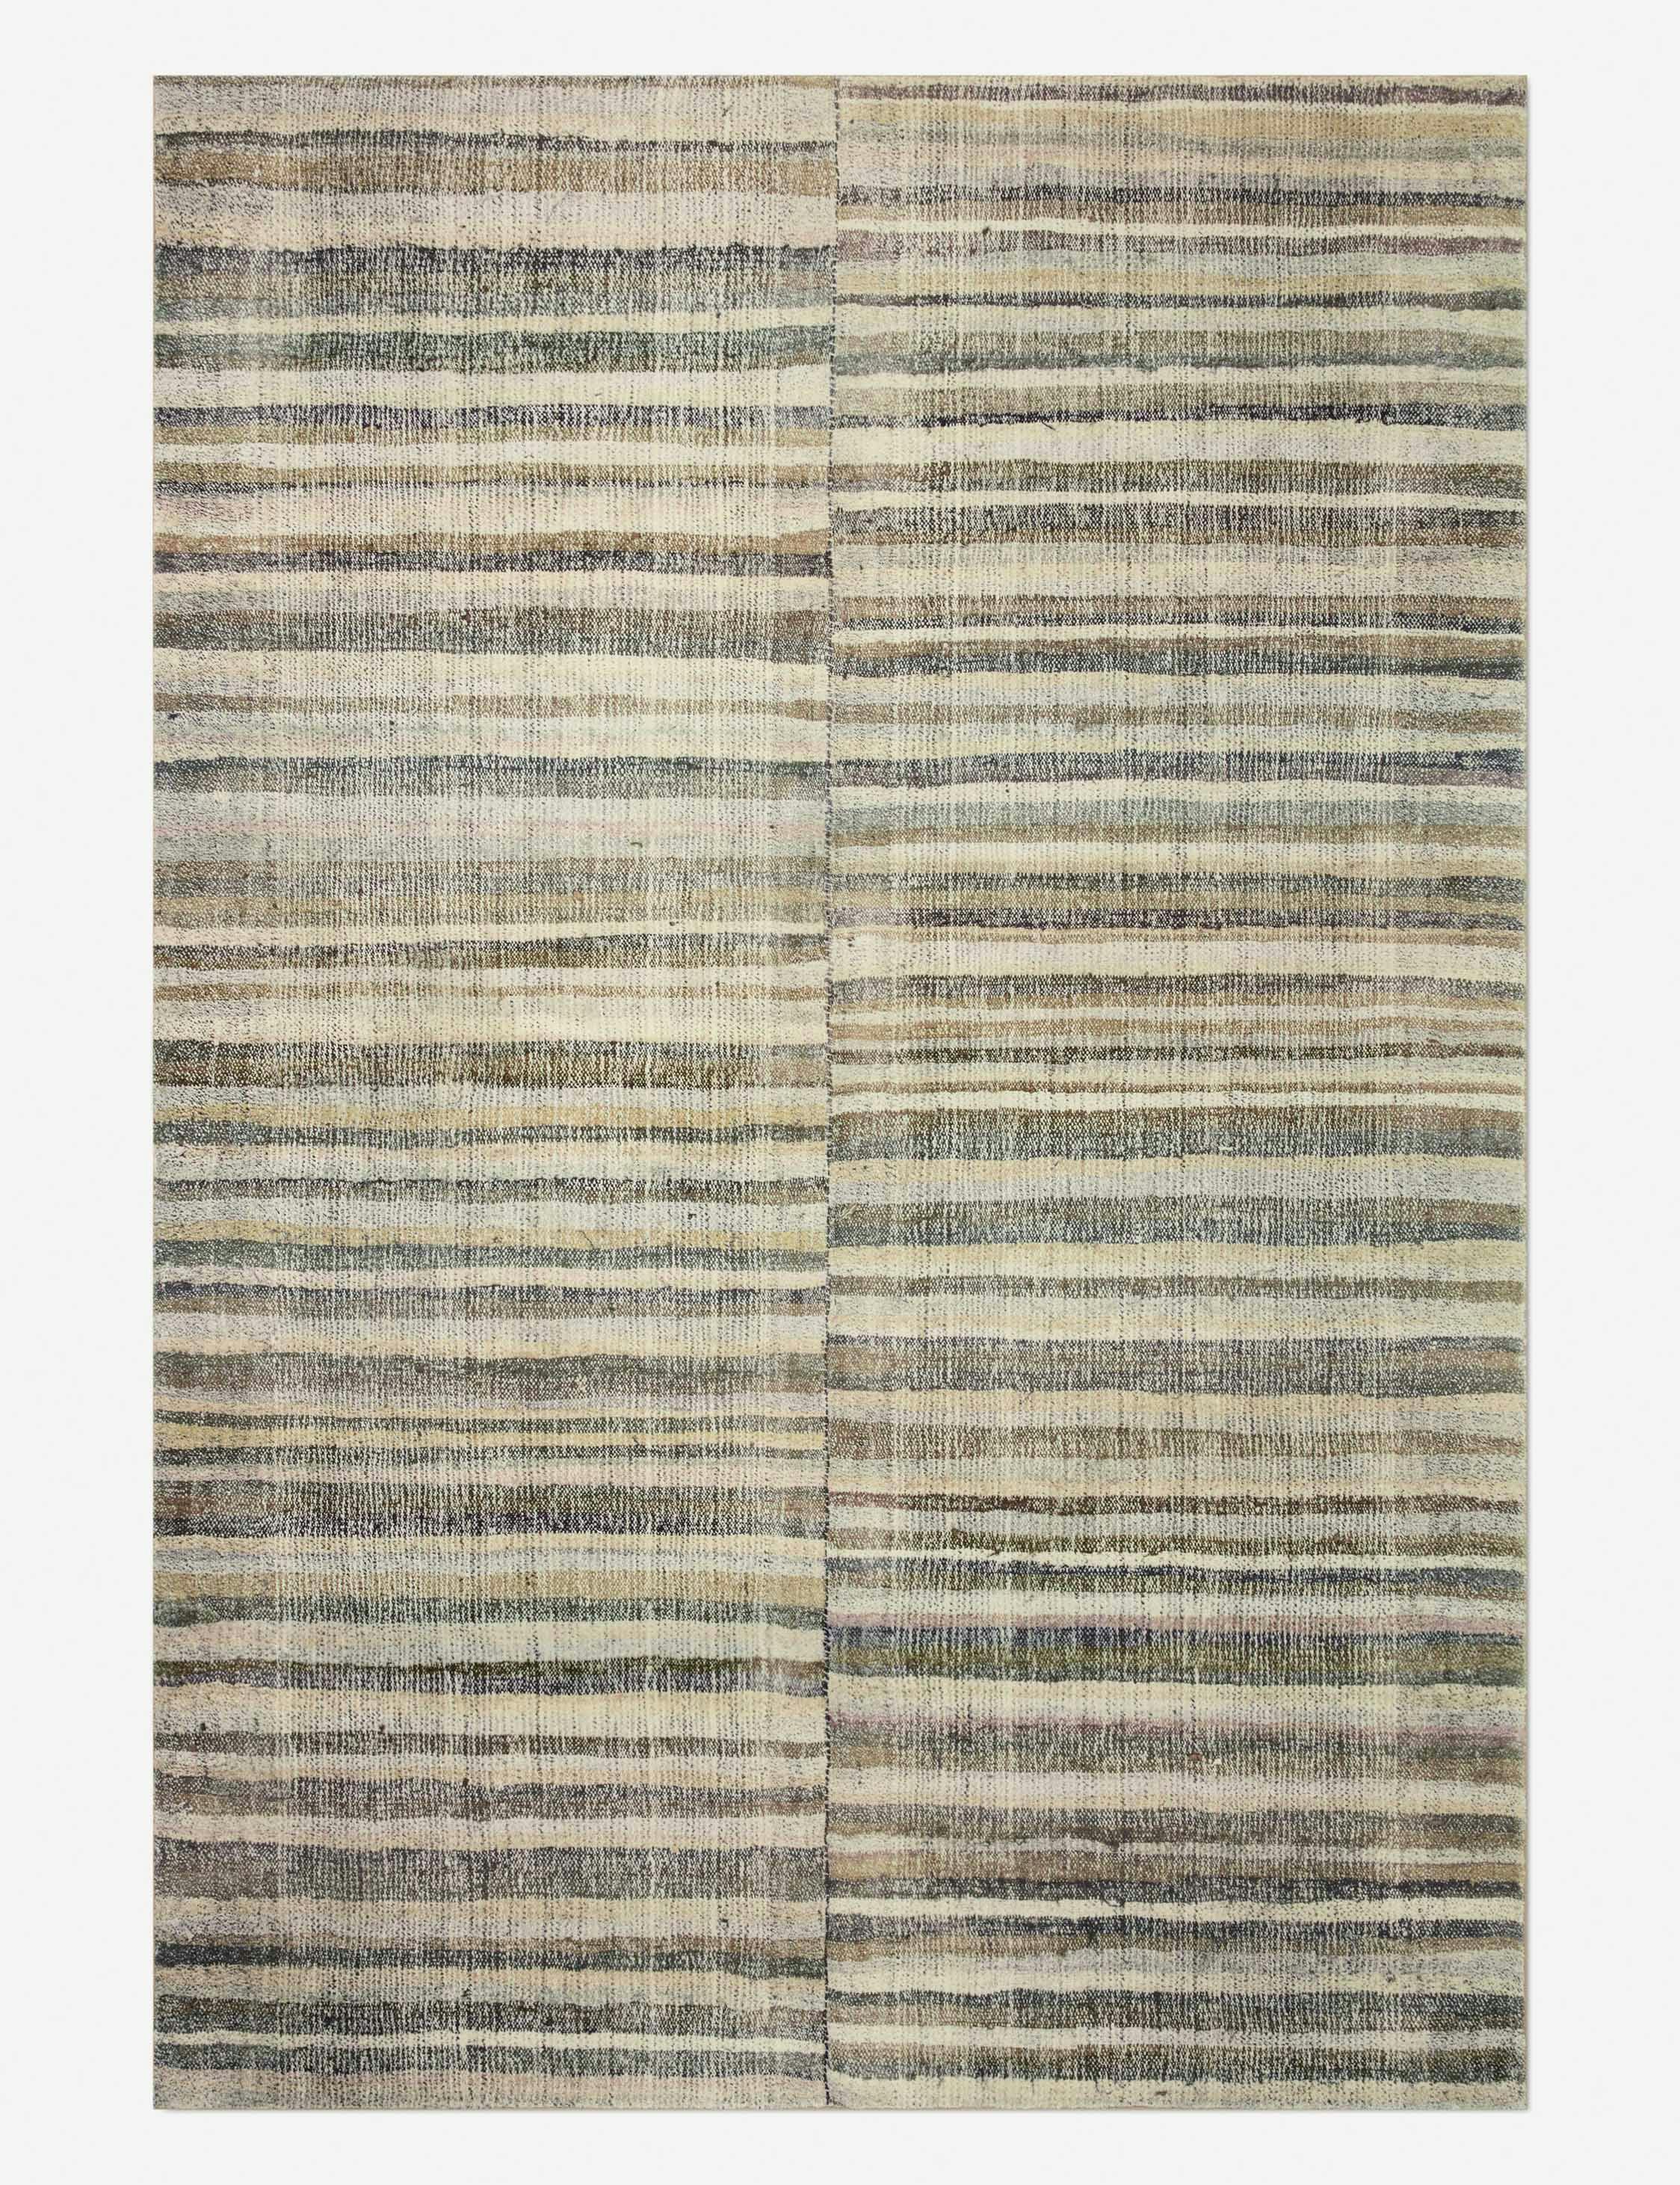 Humphrey Modern Plaid Runner Rug in Natural and Moss - 2'3" x 11'6"